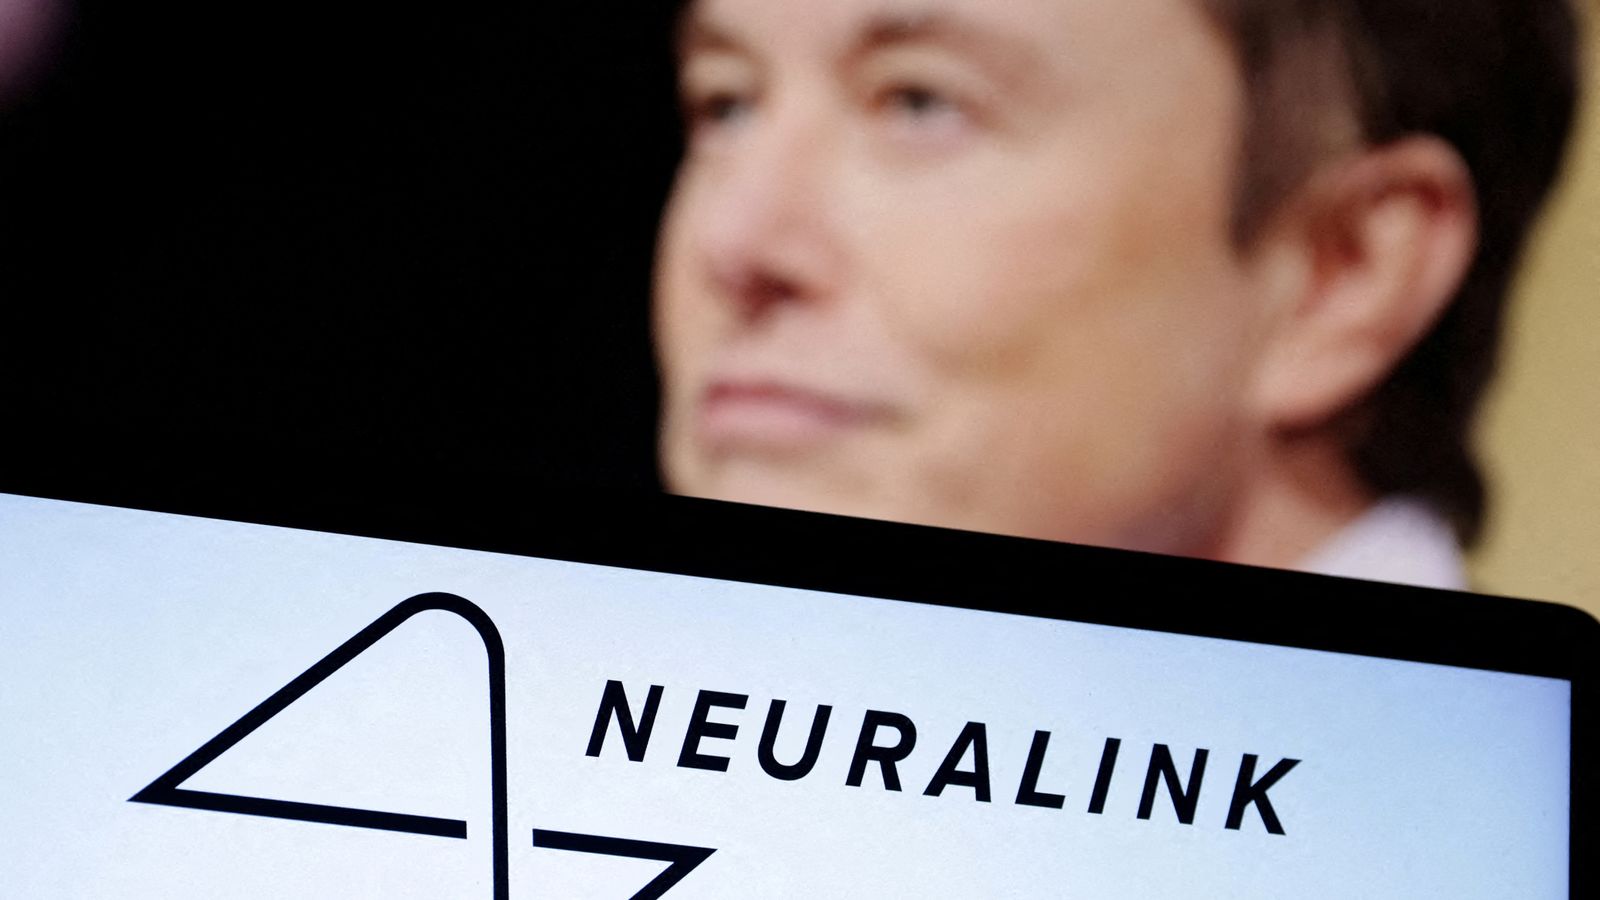 Human implanted with Neuralink brain chip ‘can control computer mouse just by thinking’, Elon Musk says